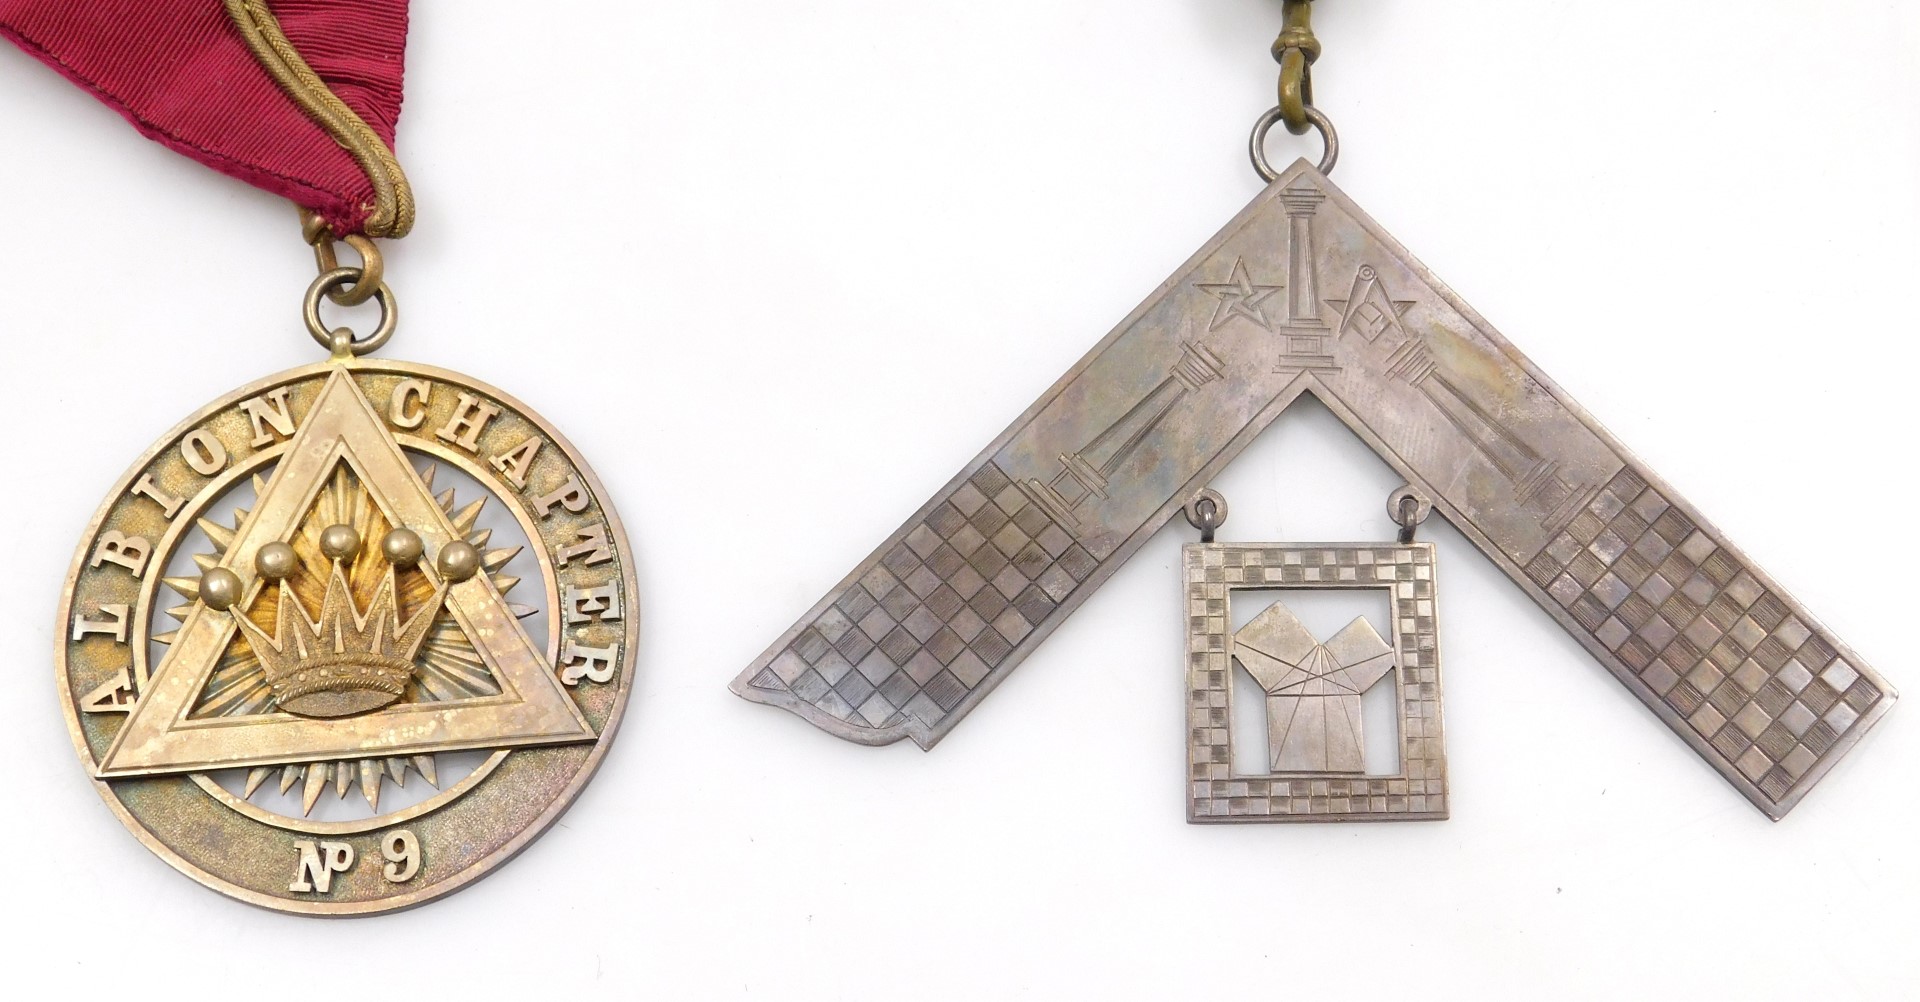 Two Victorian Masonic sashes, with a silver jewel for the Albion chapter number 9, presented to Comp - Image 2 of 3